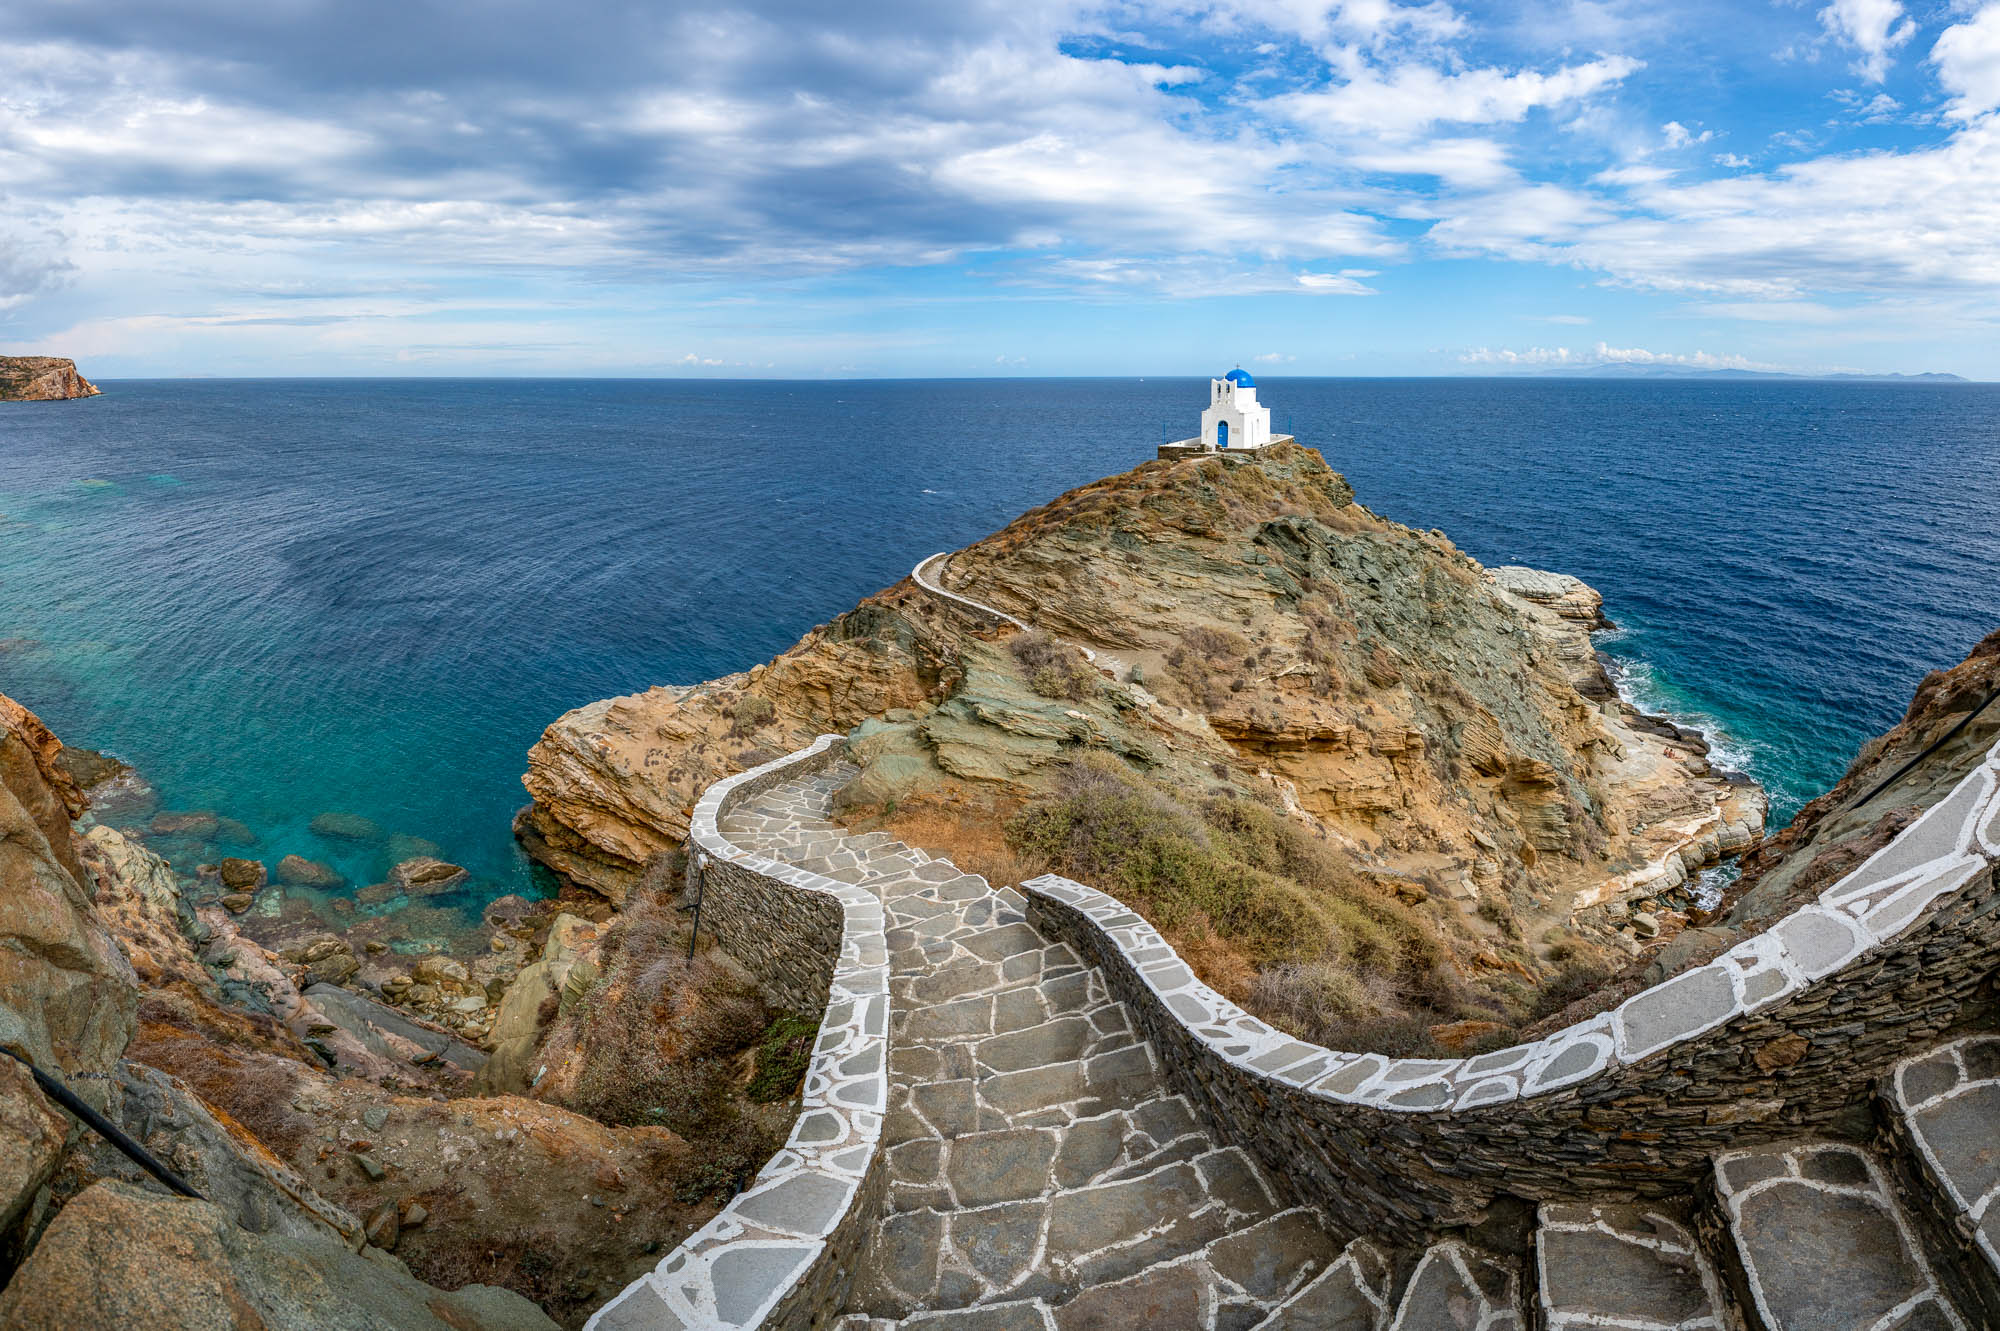 A winding stone pathway leads to a small white lighthouse perched on a rugged cliff overlooking the serene blue sea under a partly cloudy sky.